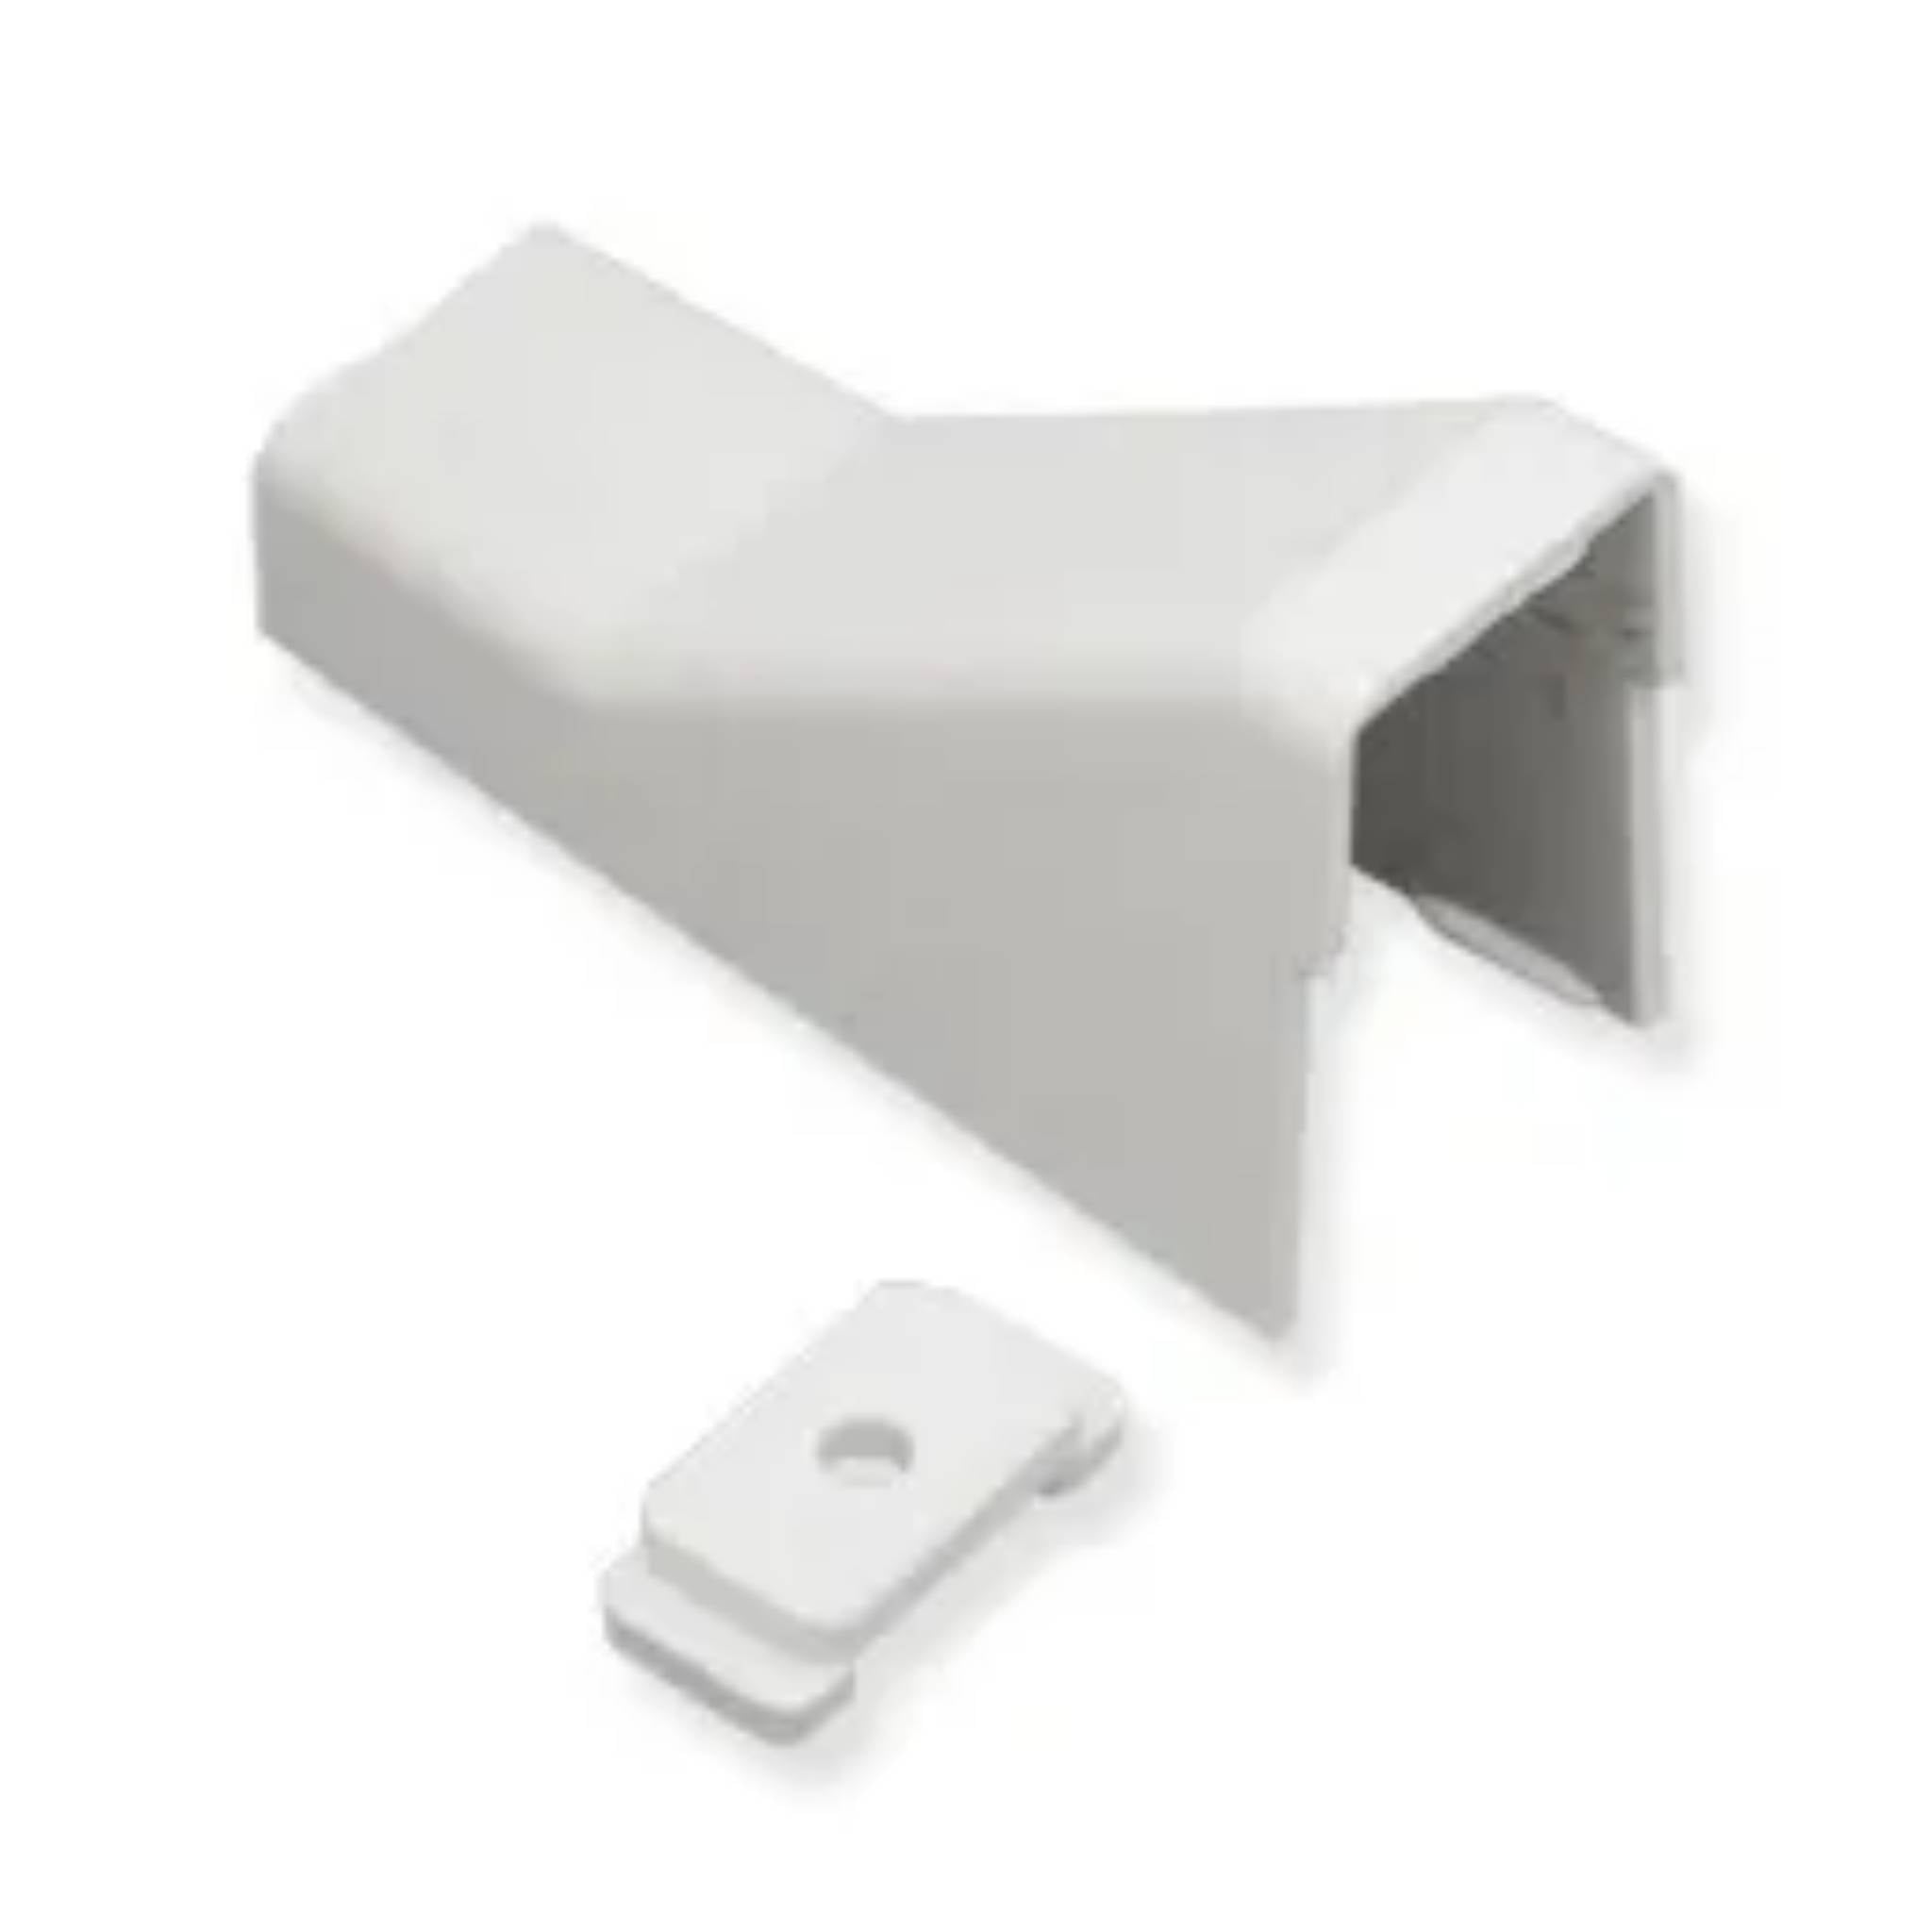 ICC Ceiling Entry & Clip, 3/4", White